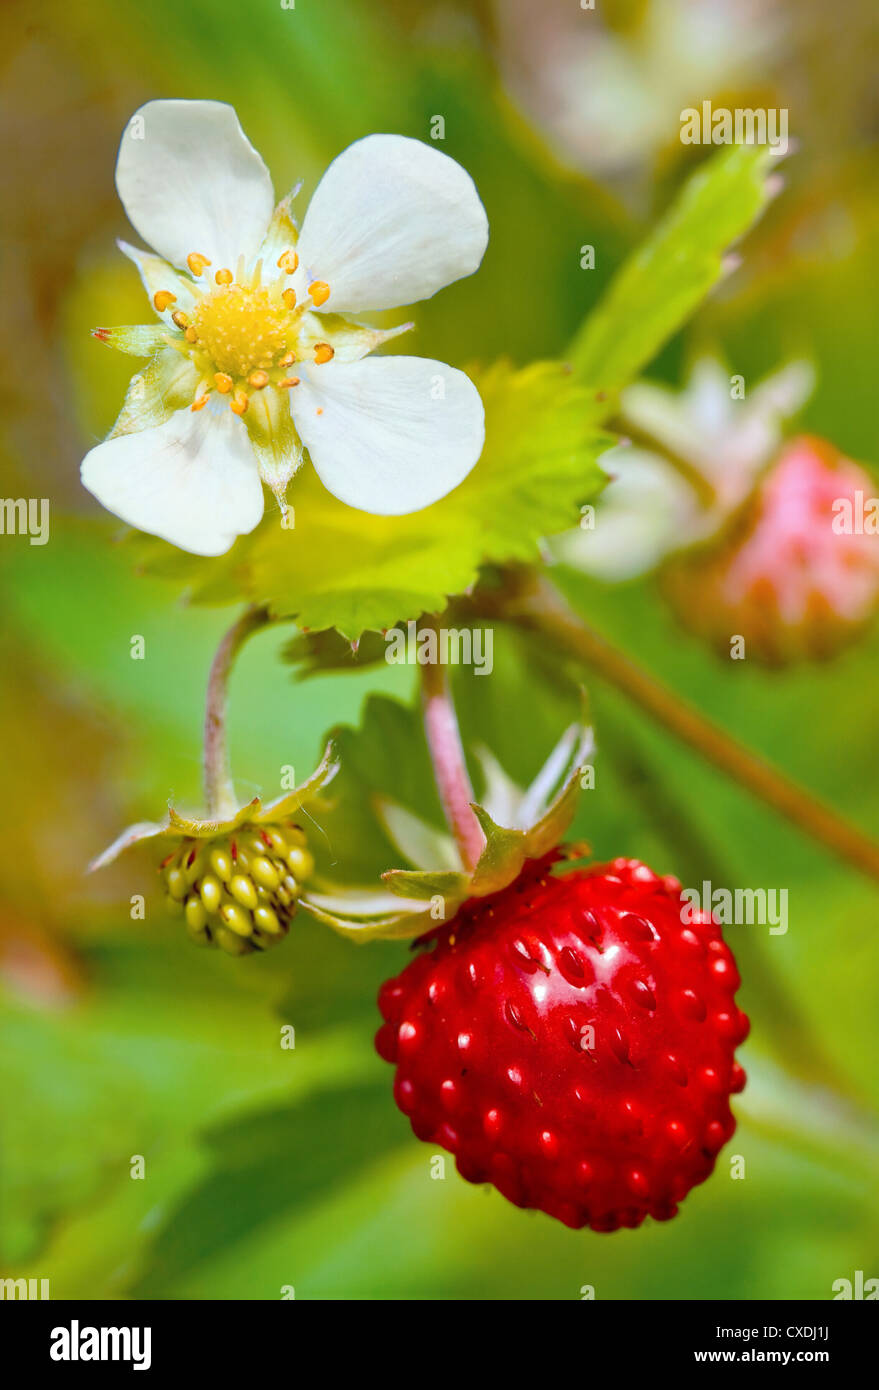 Closeup of a wild strawberry with berries and florets Stock Photo